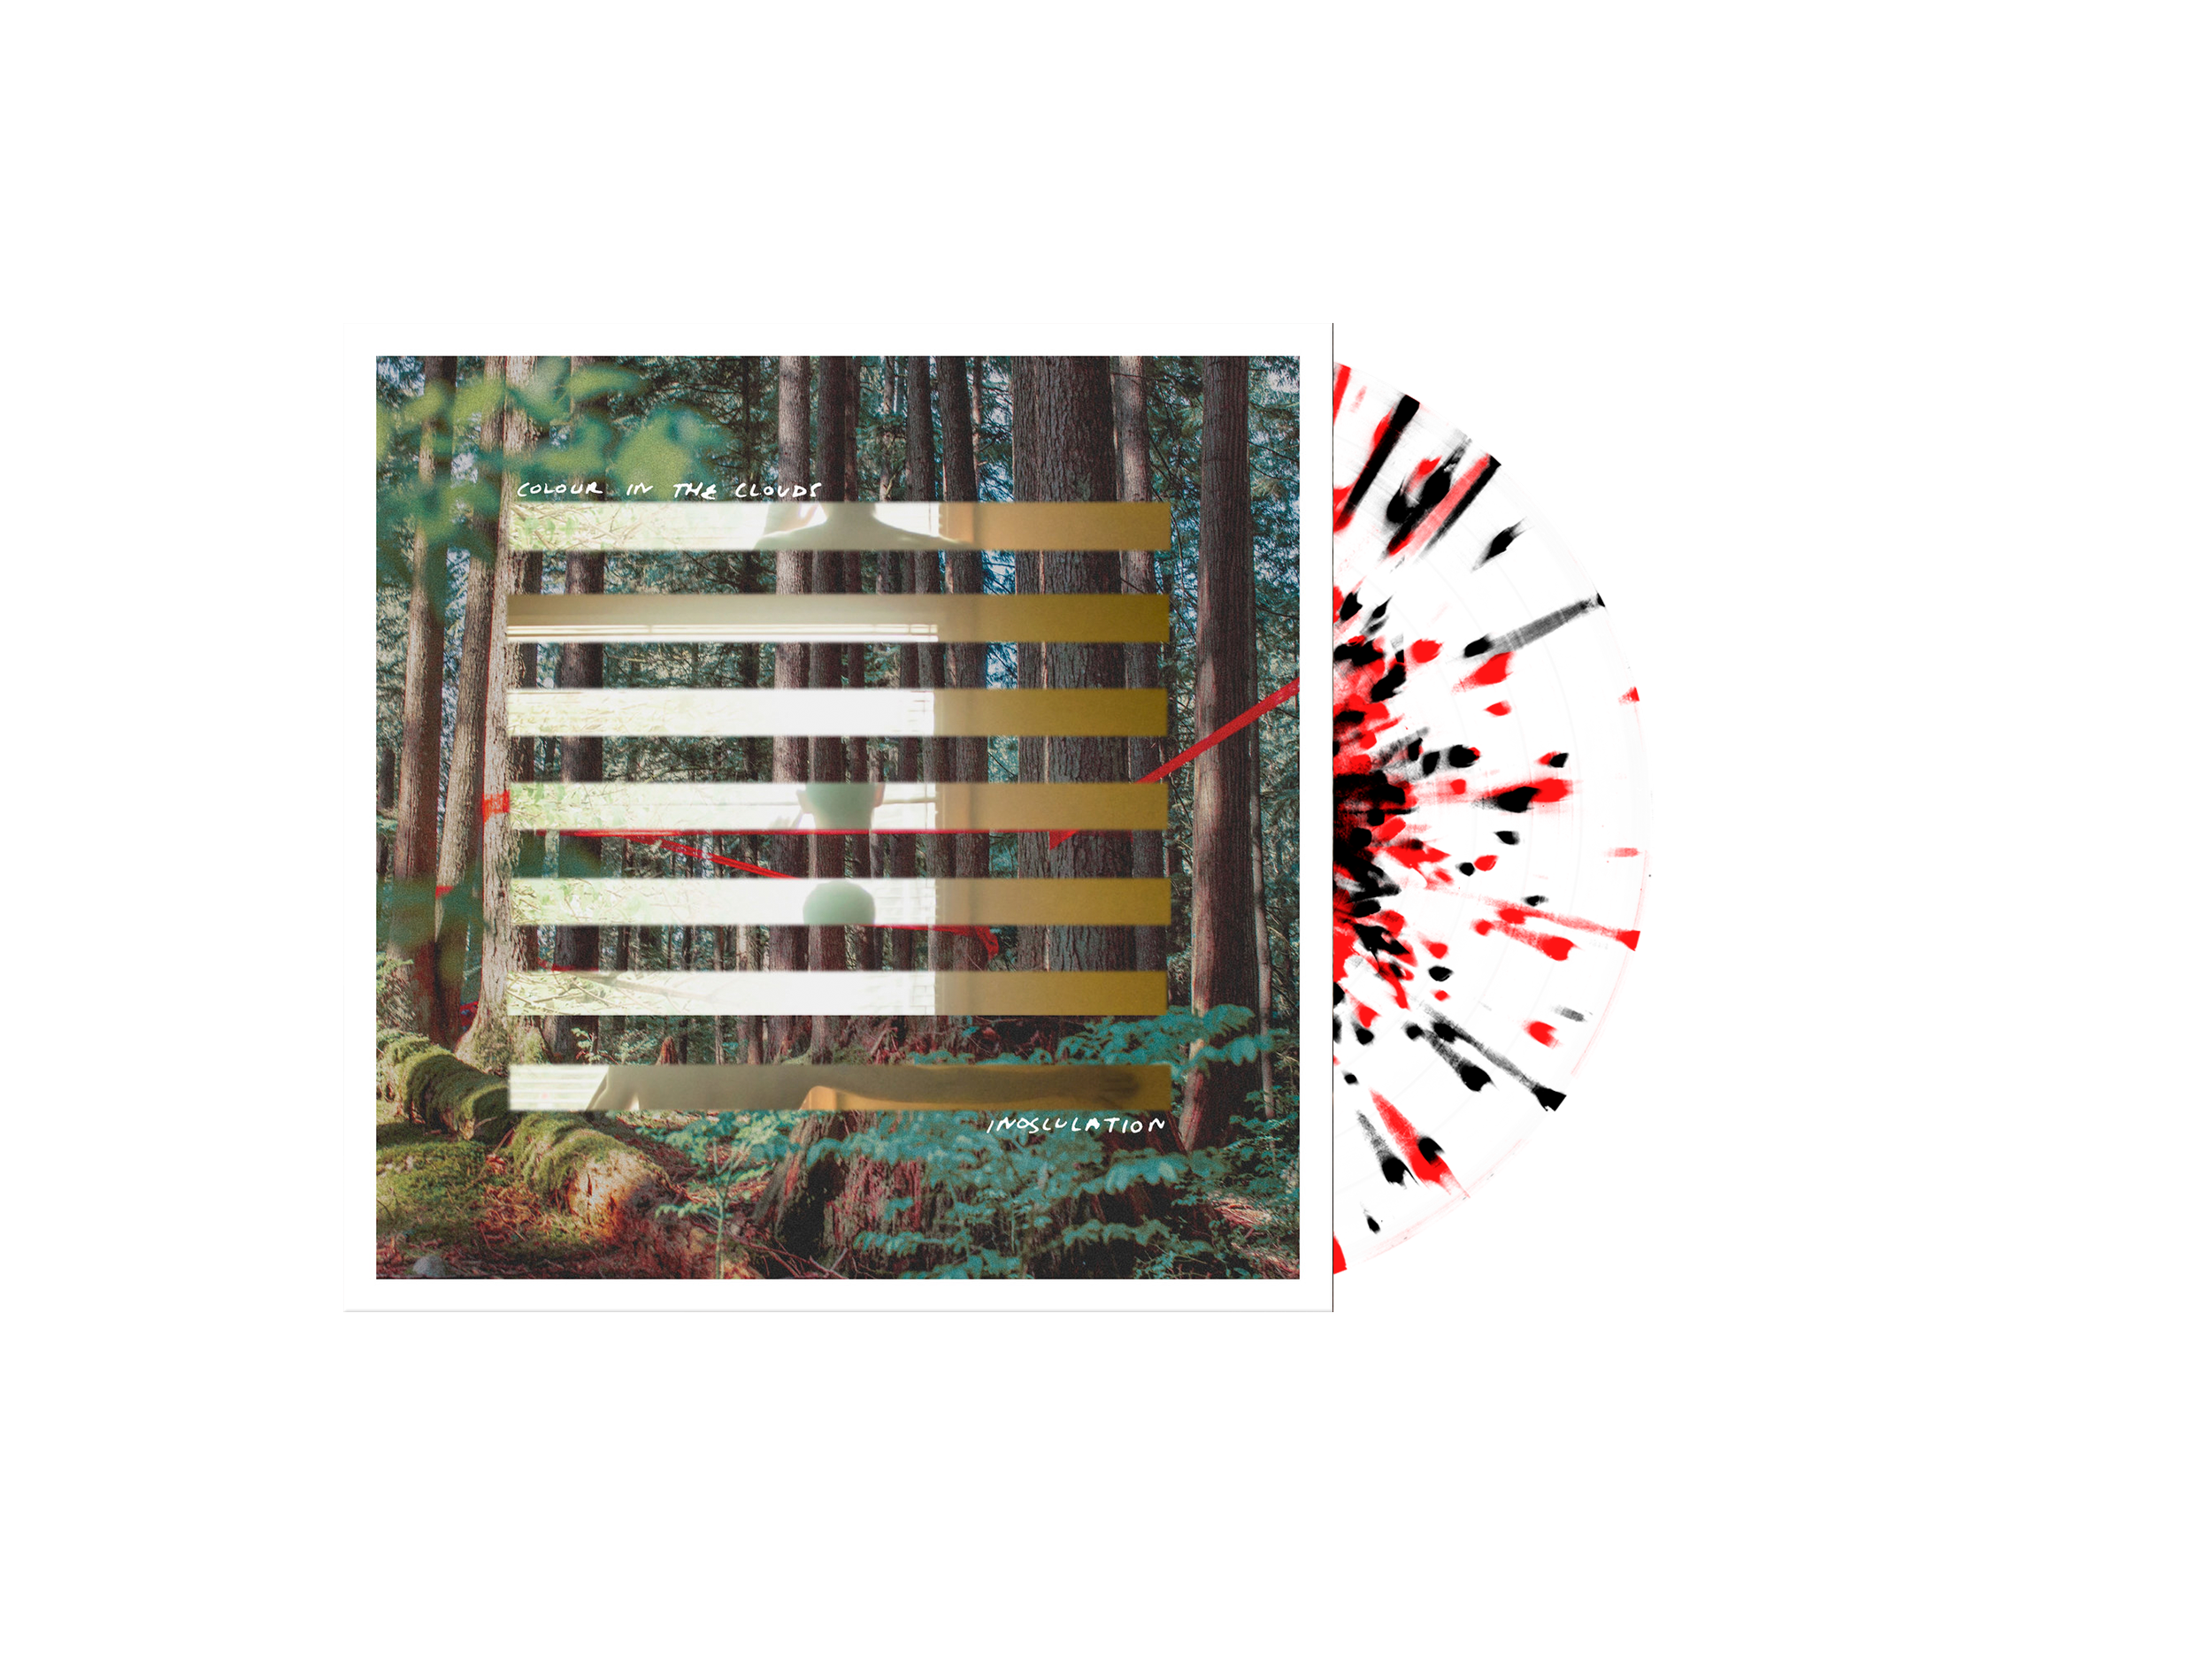 Colour in the Clouds - Inosculation Vinyl (Poppy Seed Splatter)